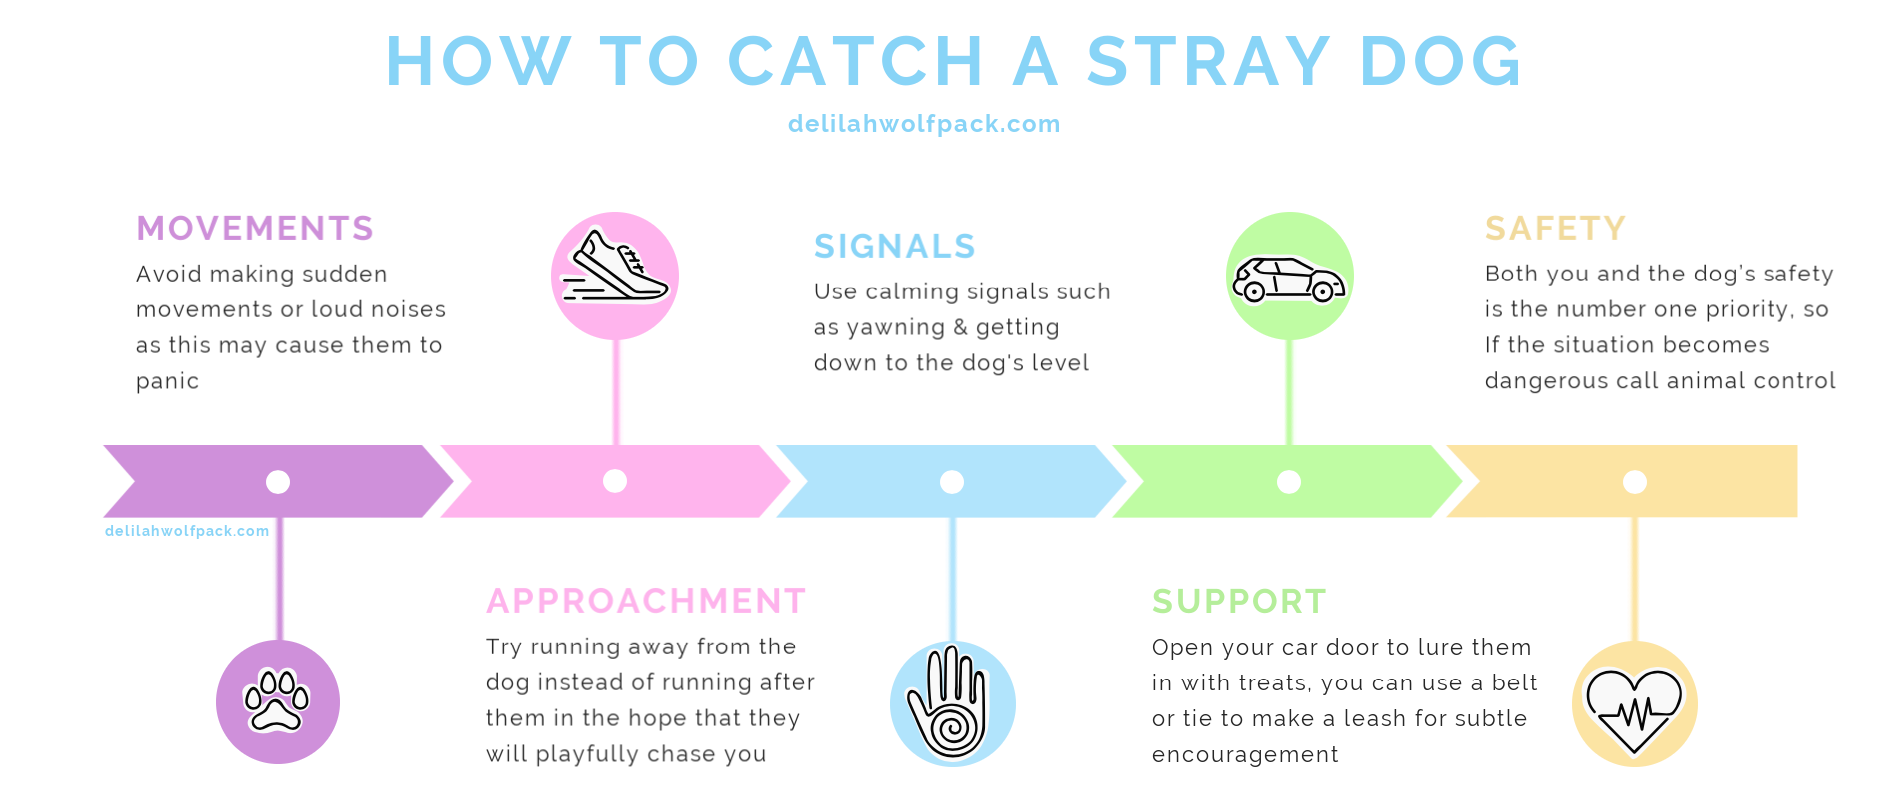 How to catch a stray dog infographic